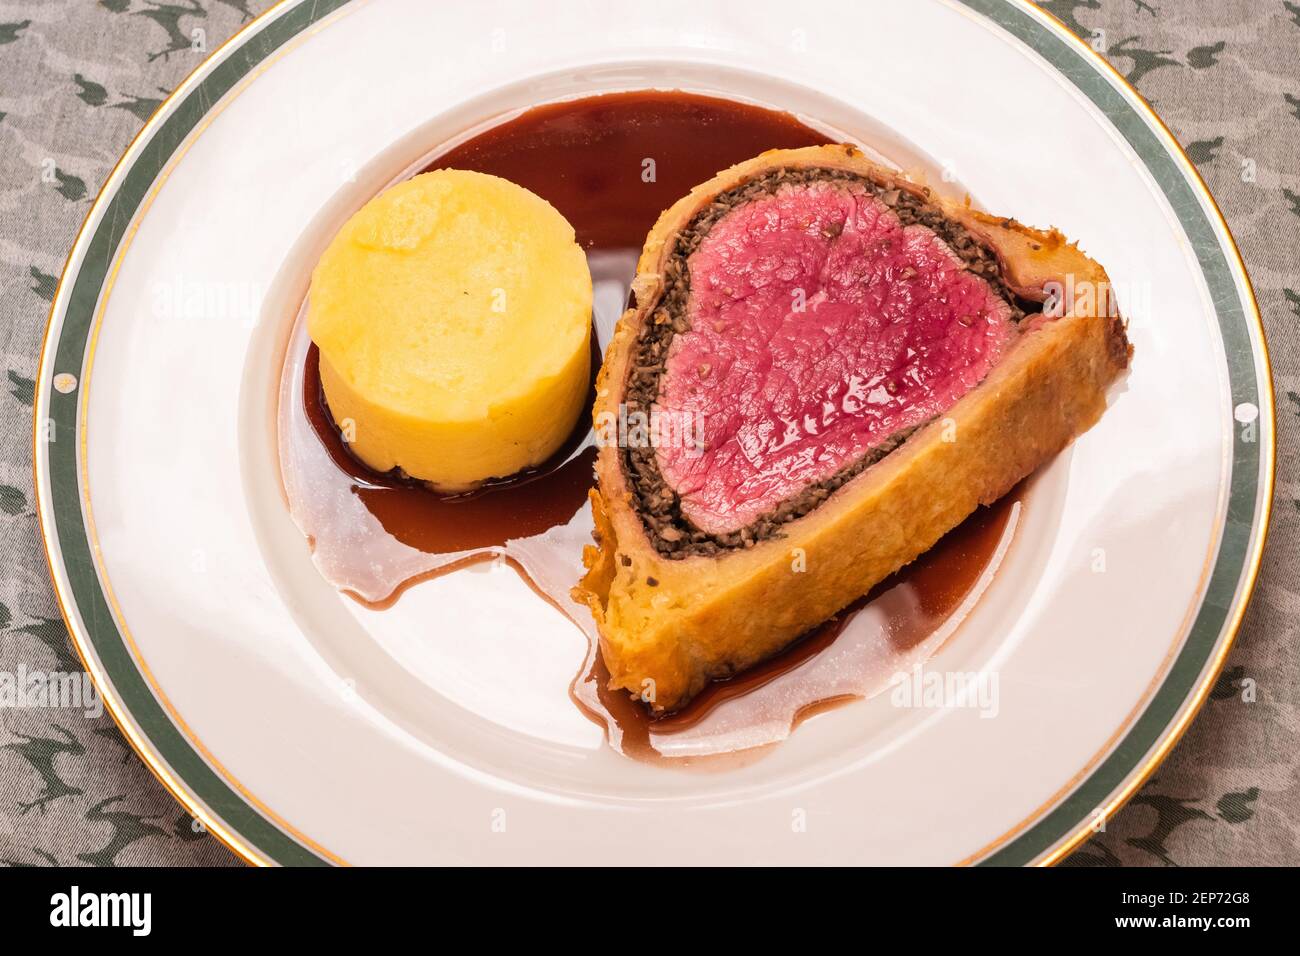 Slice of Fillet of Beef Wellington with Red Wine Gravy and Mashed Potatoes on a Plate Stock Photo